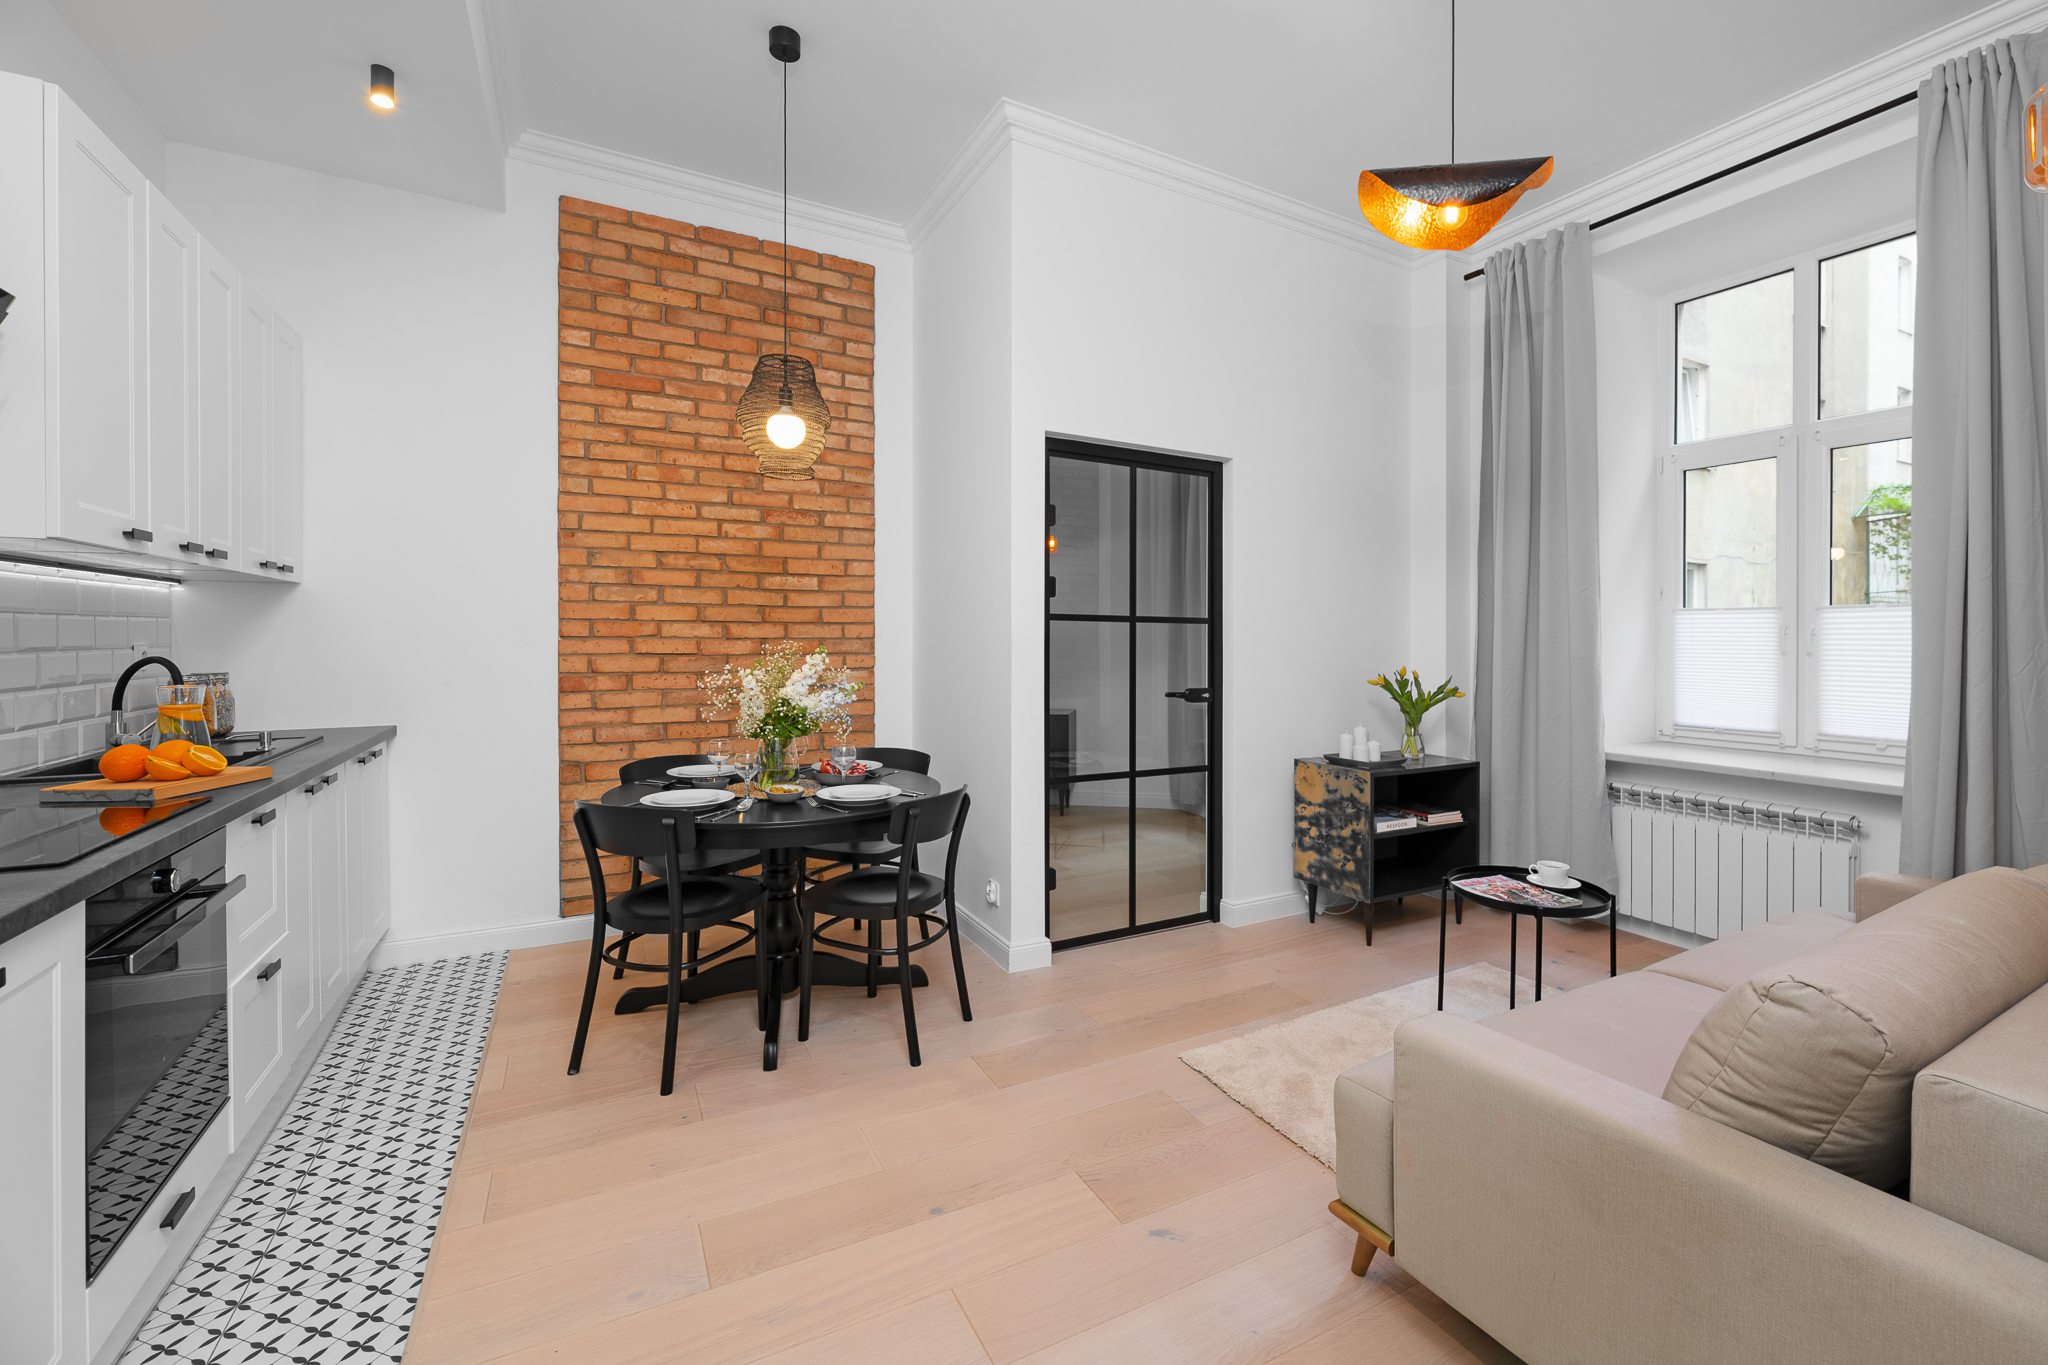 WARSAW CENTRAL  2-Bedroom Industrial Design Apartment Politechnika / Constitution Square Apartments for rent